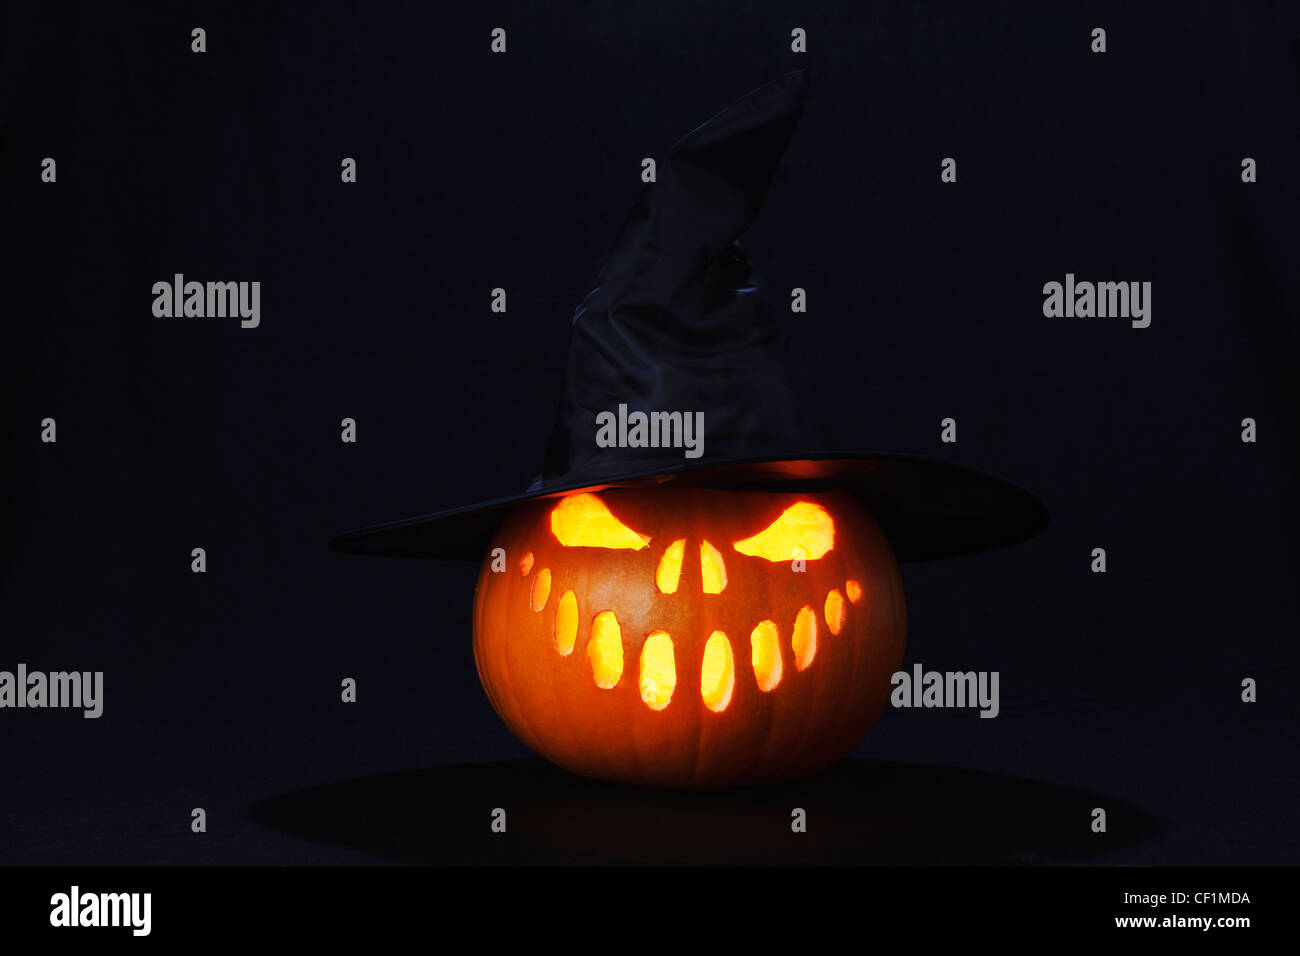 A face carved into a pumpkin for Halloween. Stock Photo